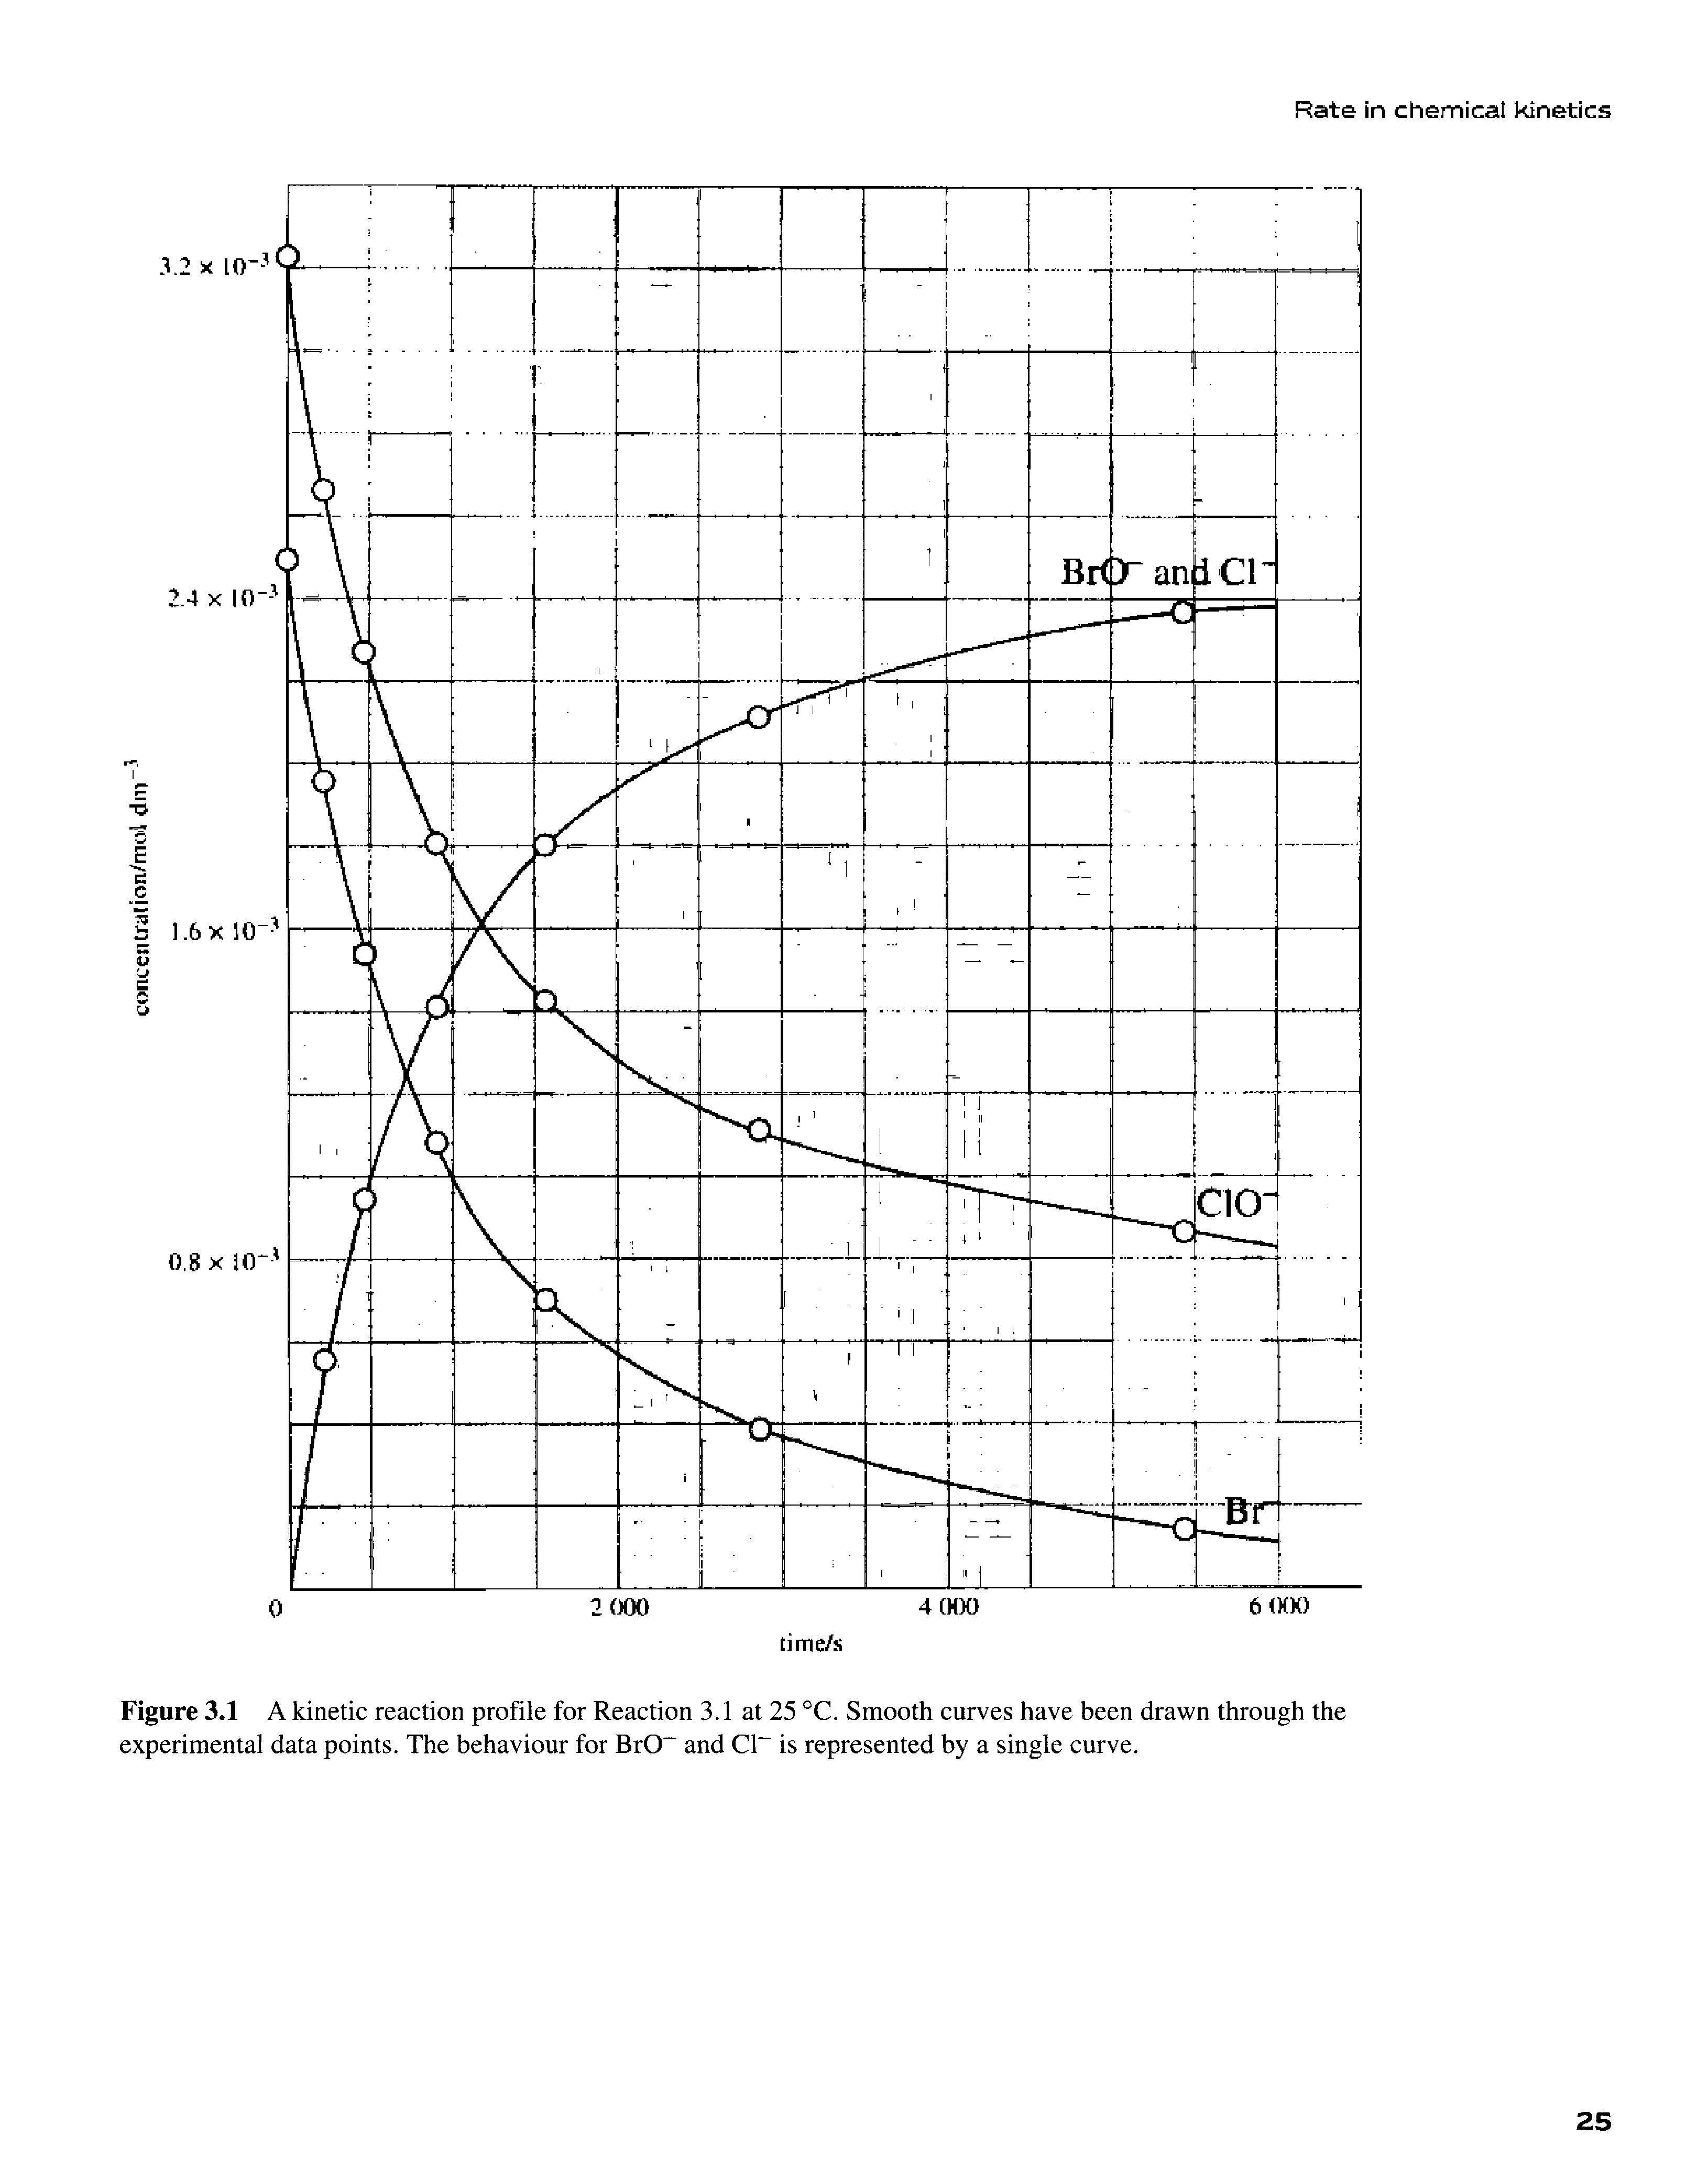 Figure 3.1 A kinetic reaction profile for Reaction 3.1 at 25 °C. Smooth curves have been drawn through the experimental data points. The behaviour for BrO and Cl is represented by a single curve.